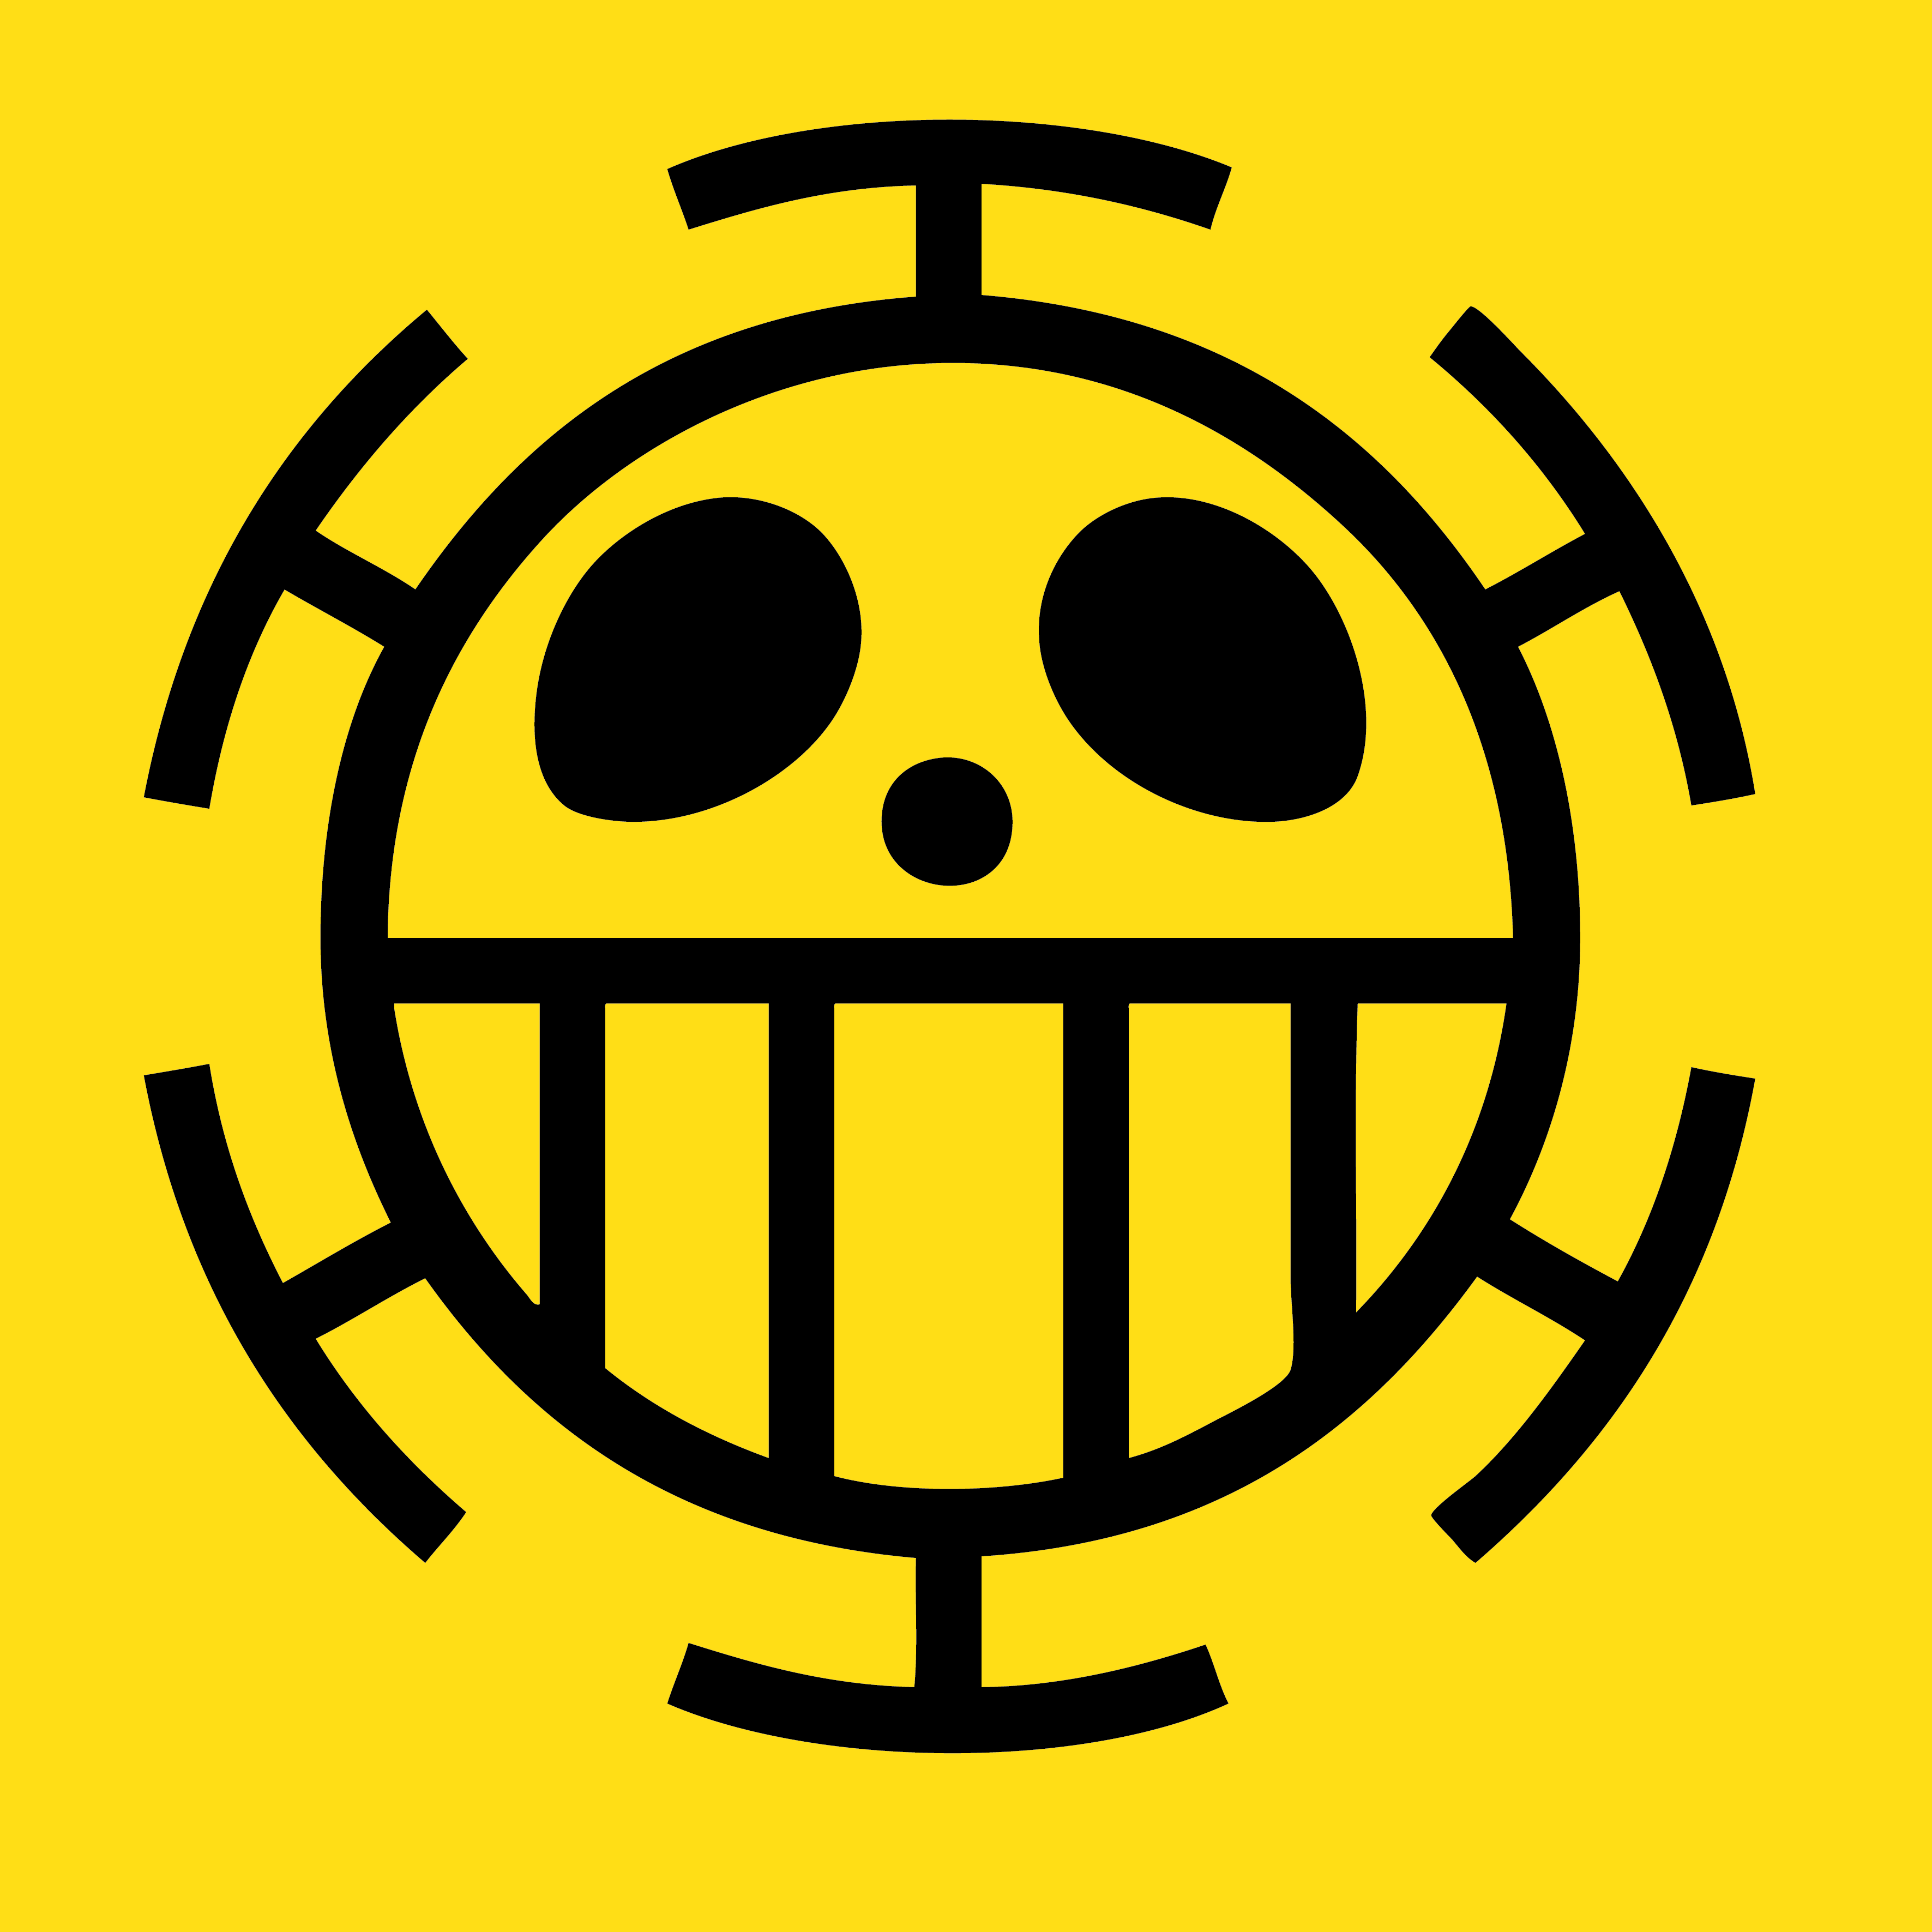 1000+ images about Trafalgar Law